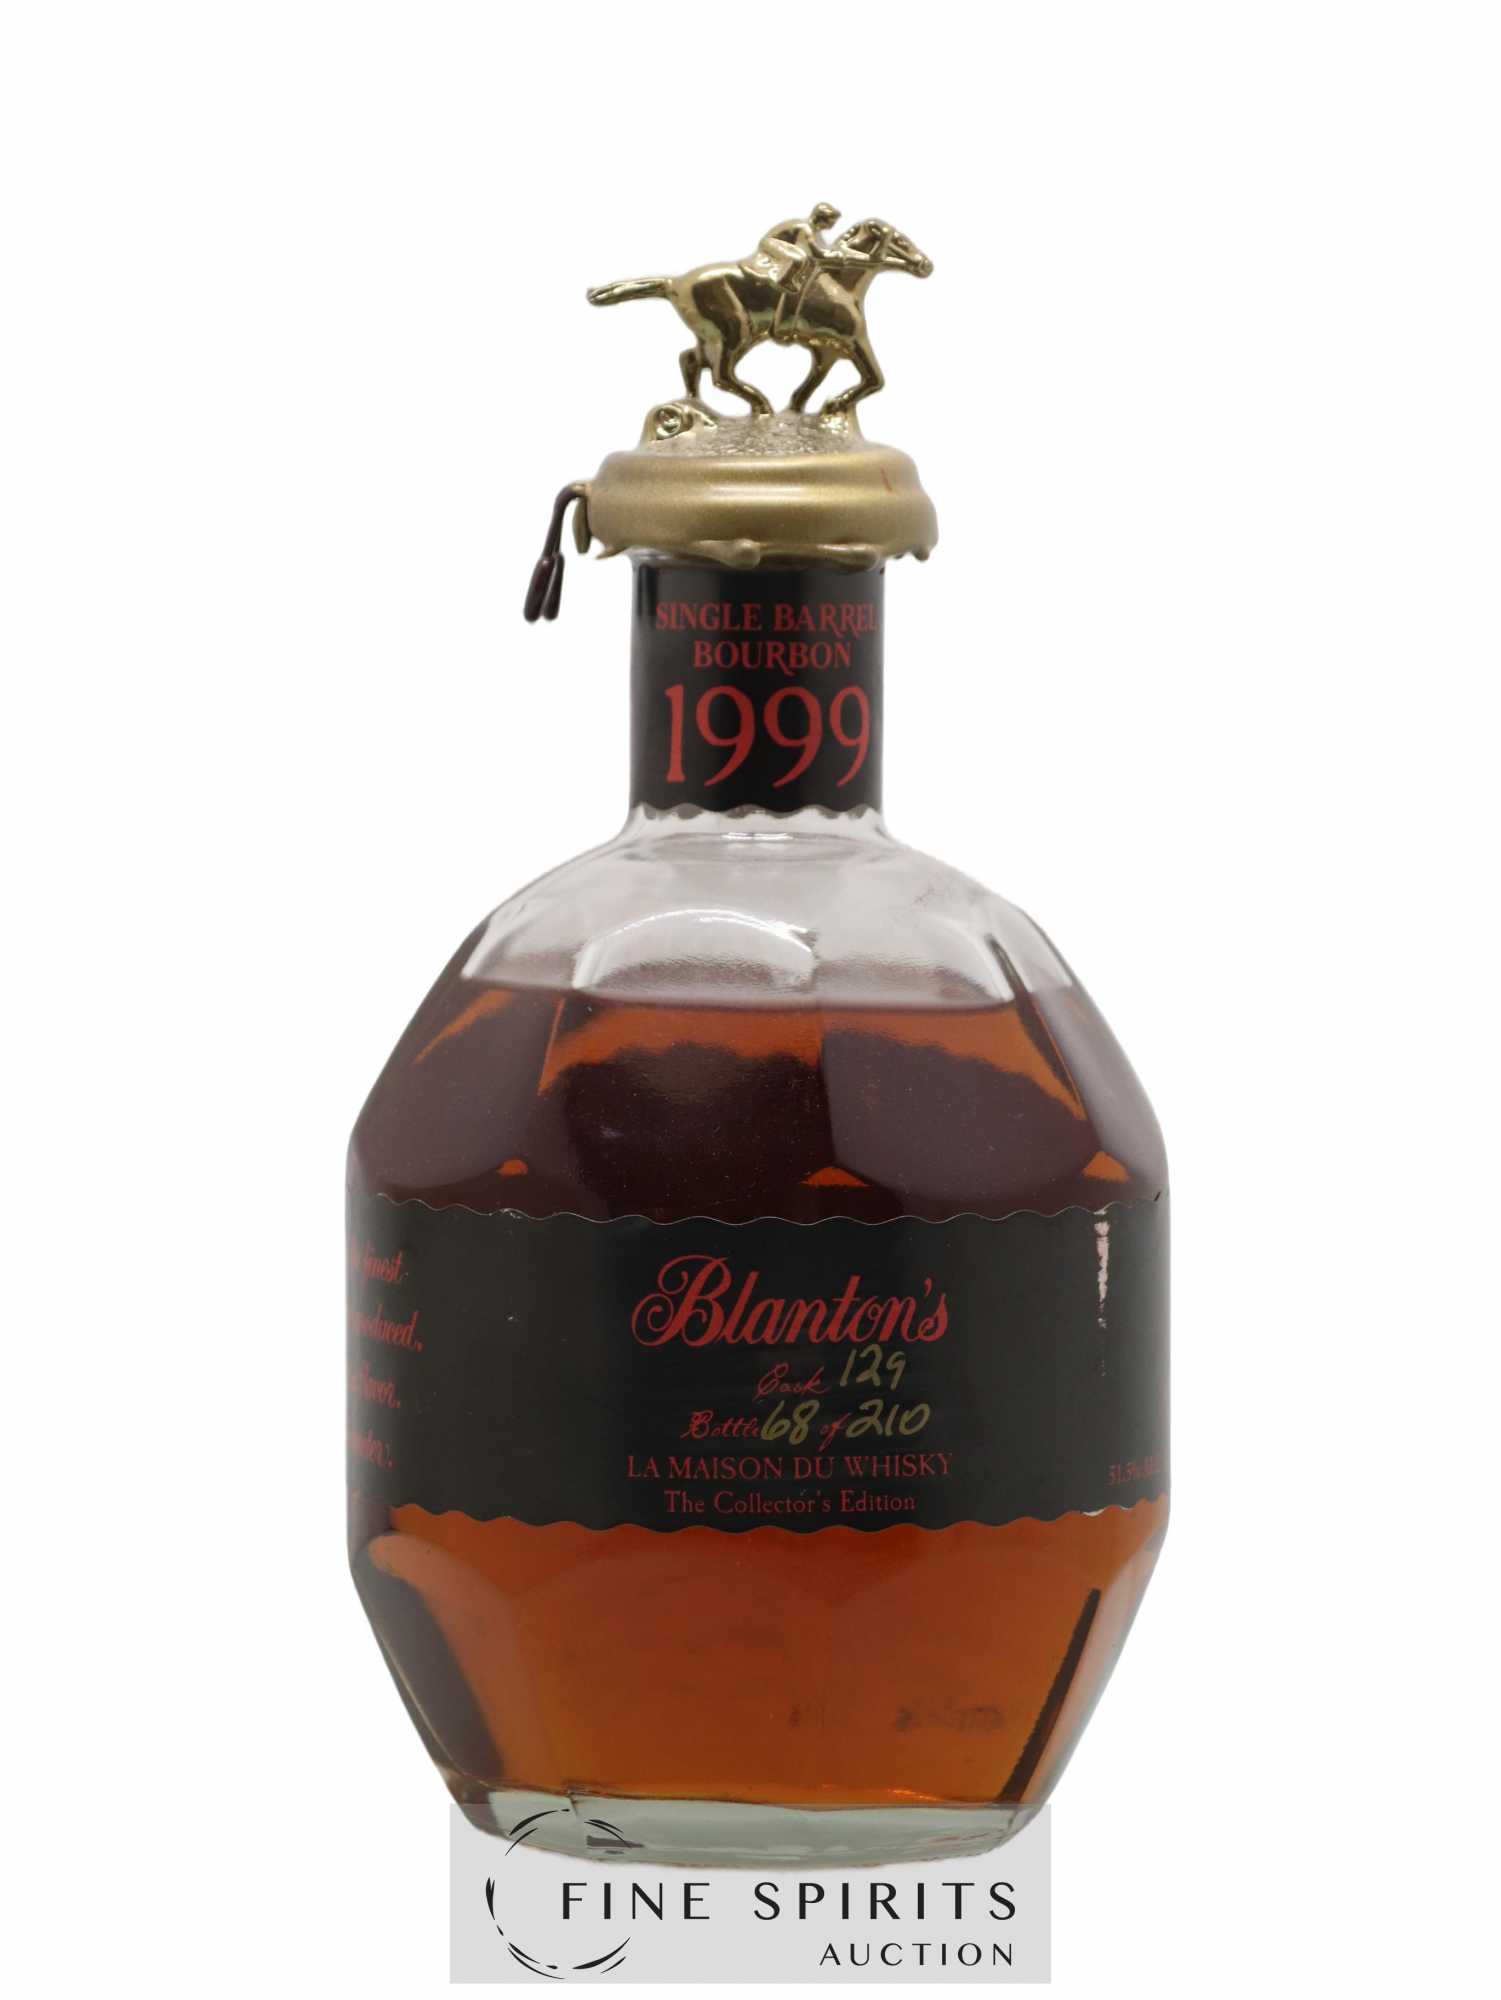 Blanton's 1999 Of. Cask 129 - One of 210 LMDW The Collector's Edition 